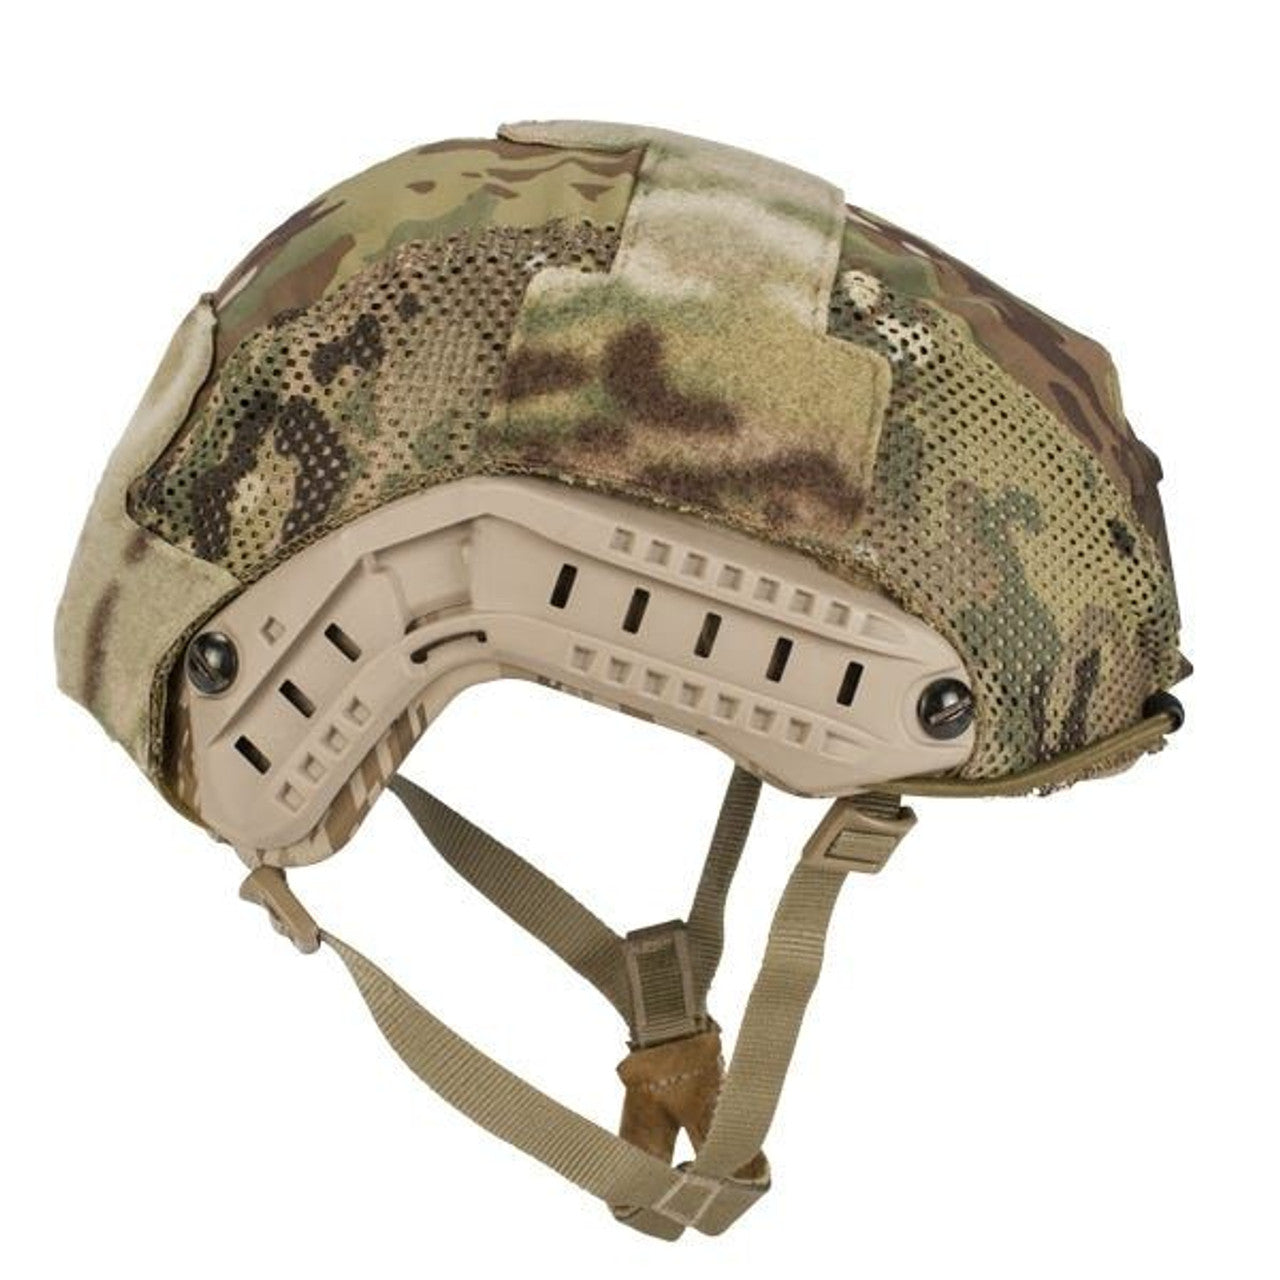 First Spear Helmet Cover Hybrid, OPS-CORE Maritime